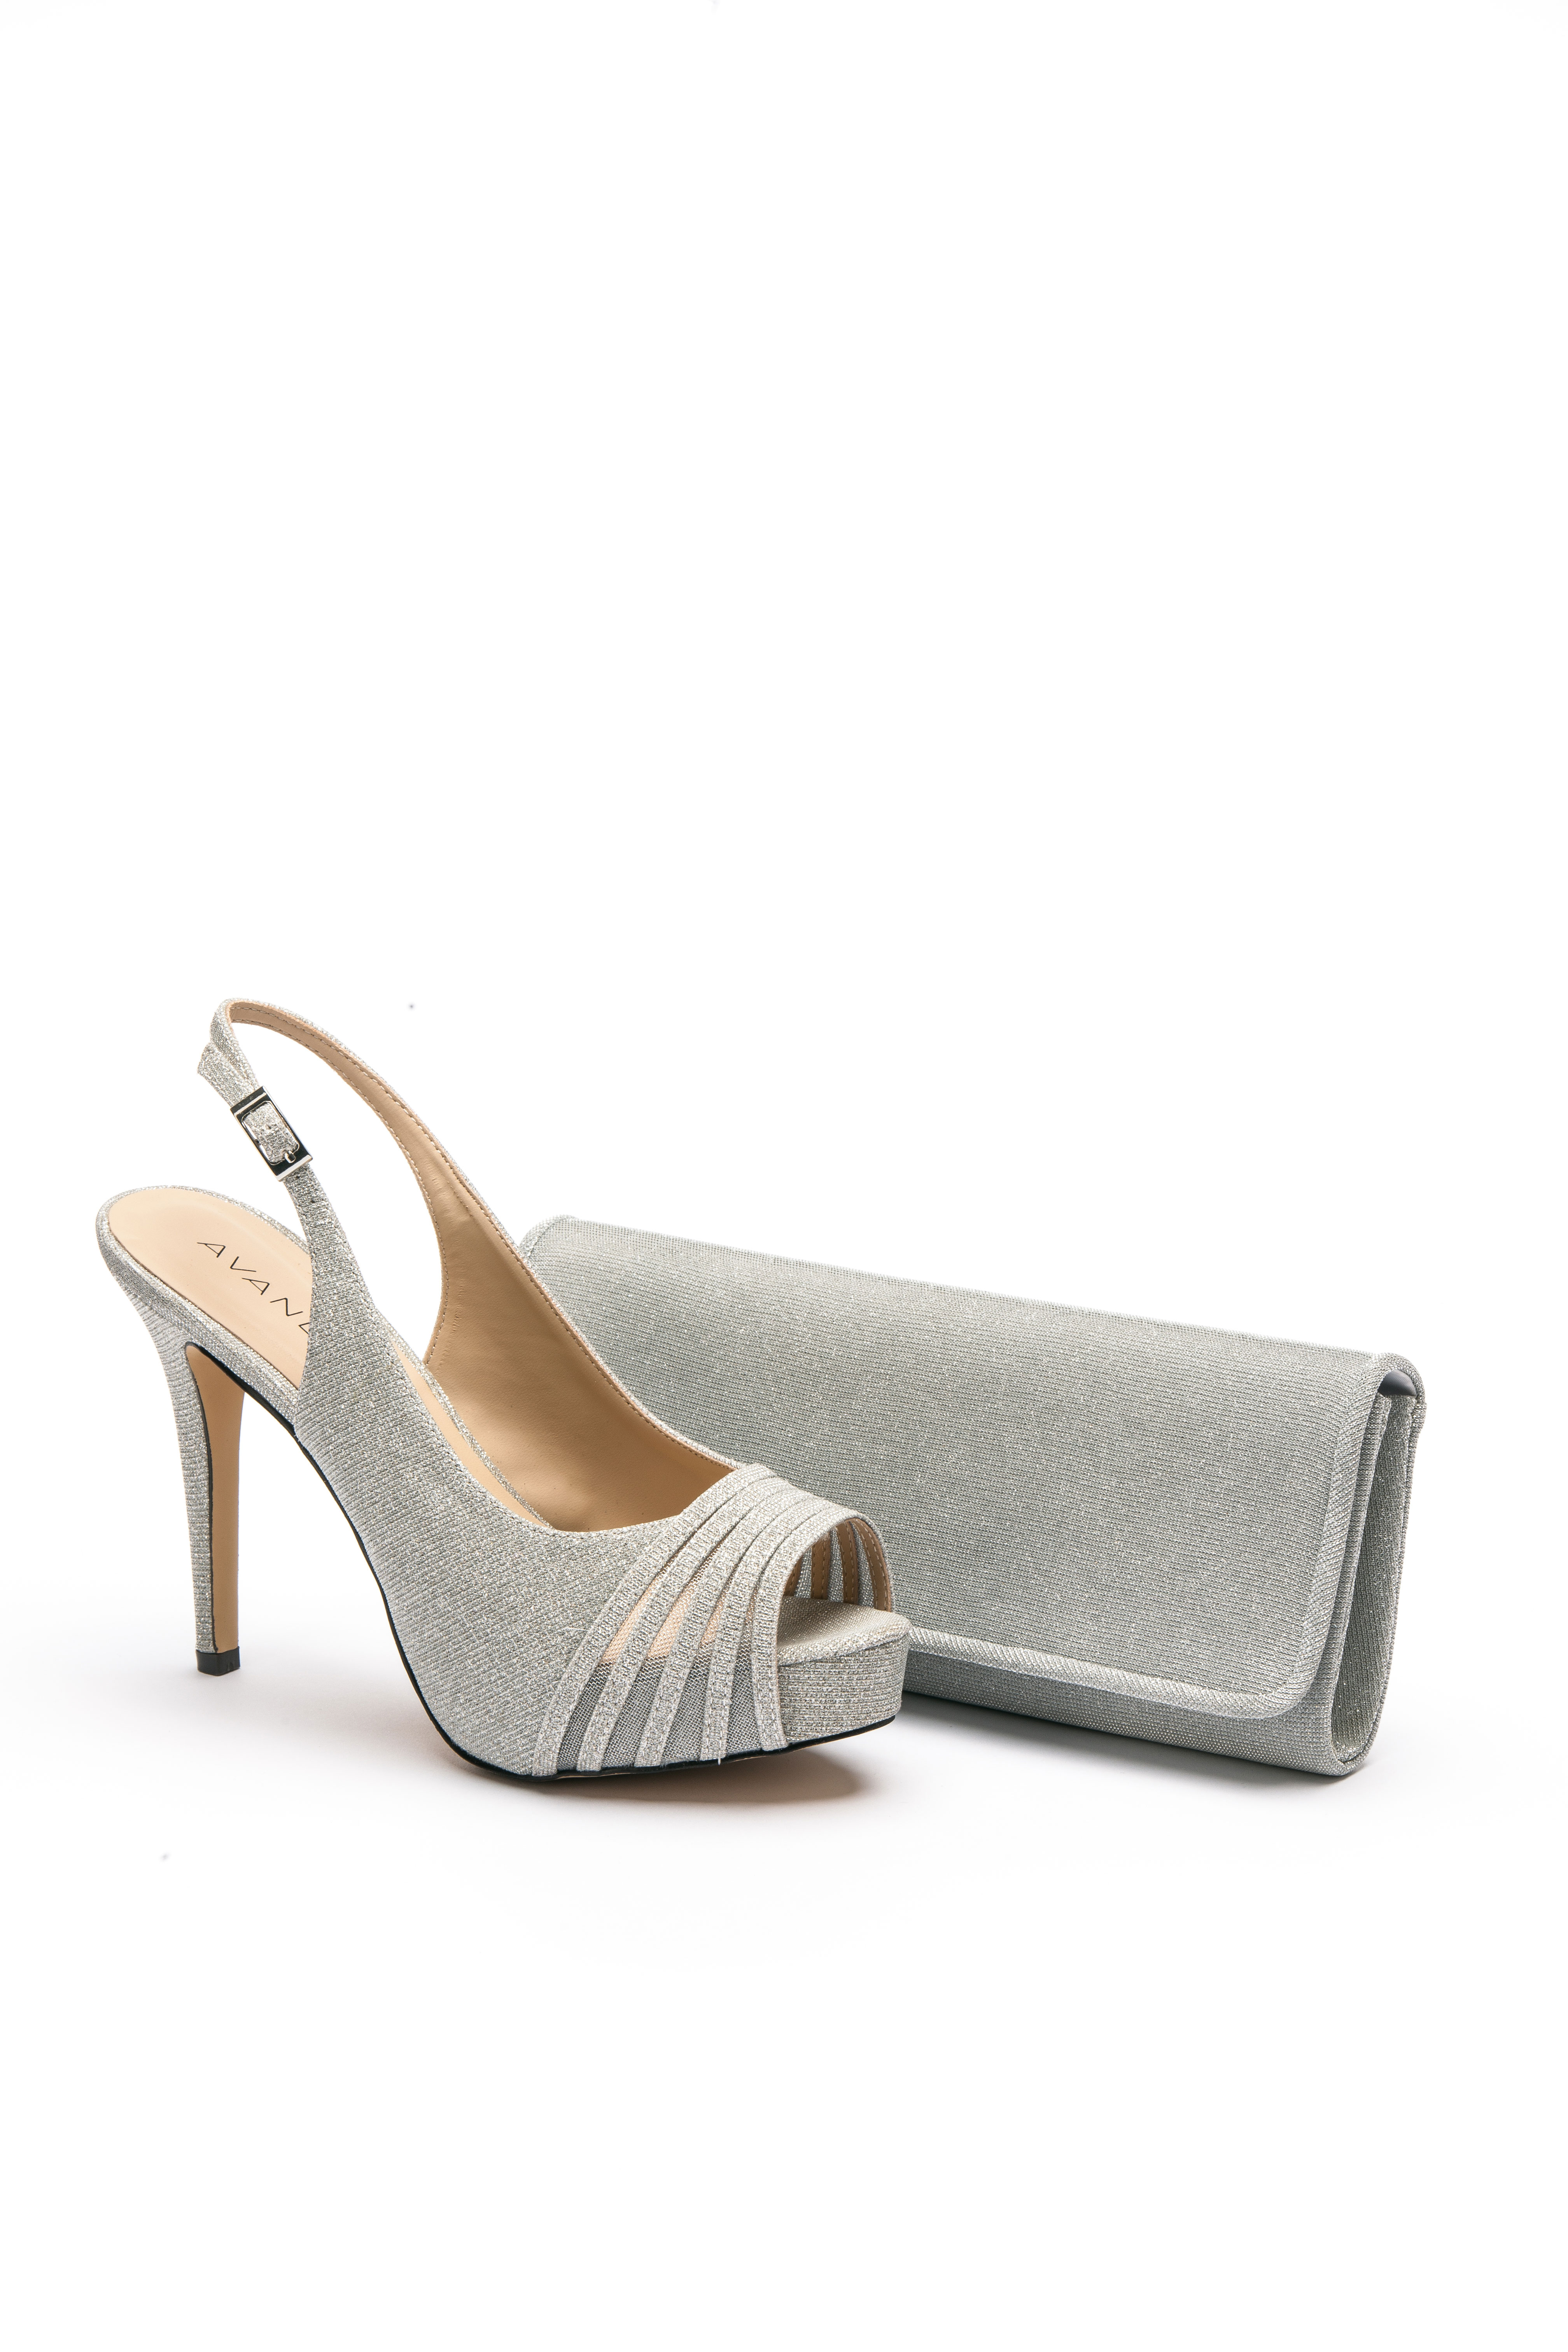 Glittering High Heel Shoes With A Matching Purse Displayed On Grey